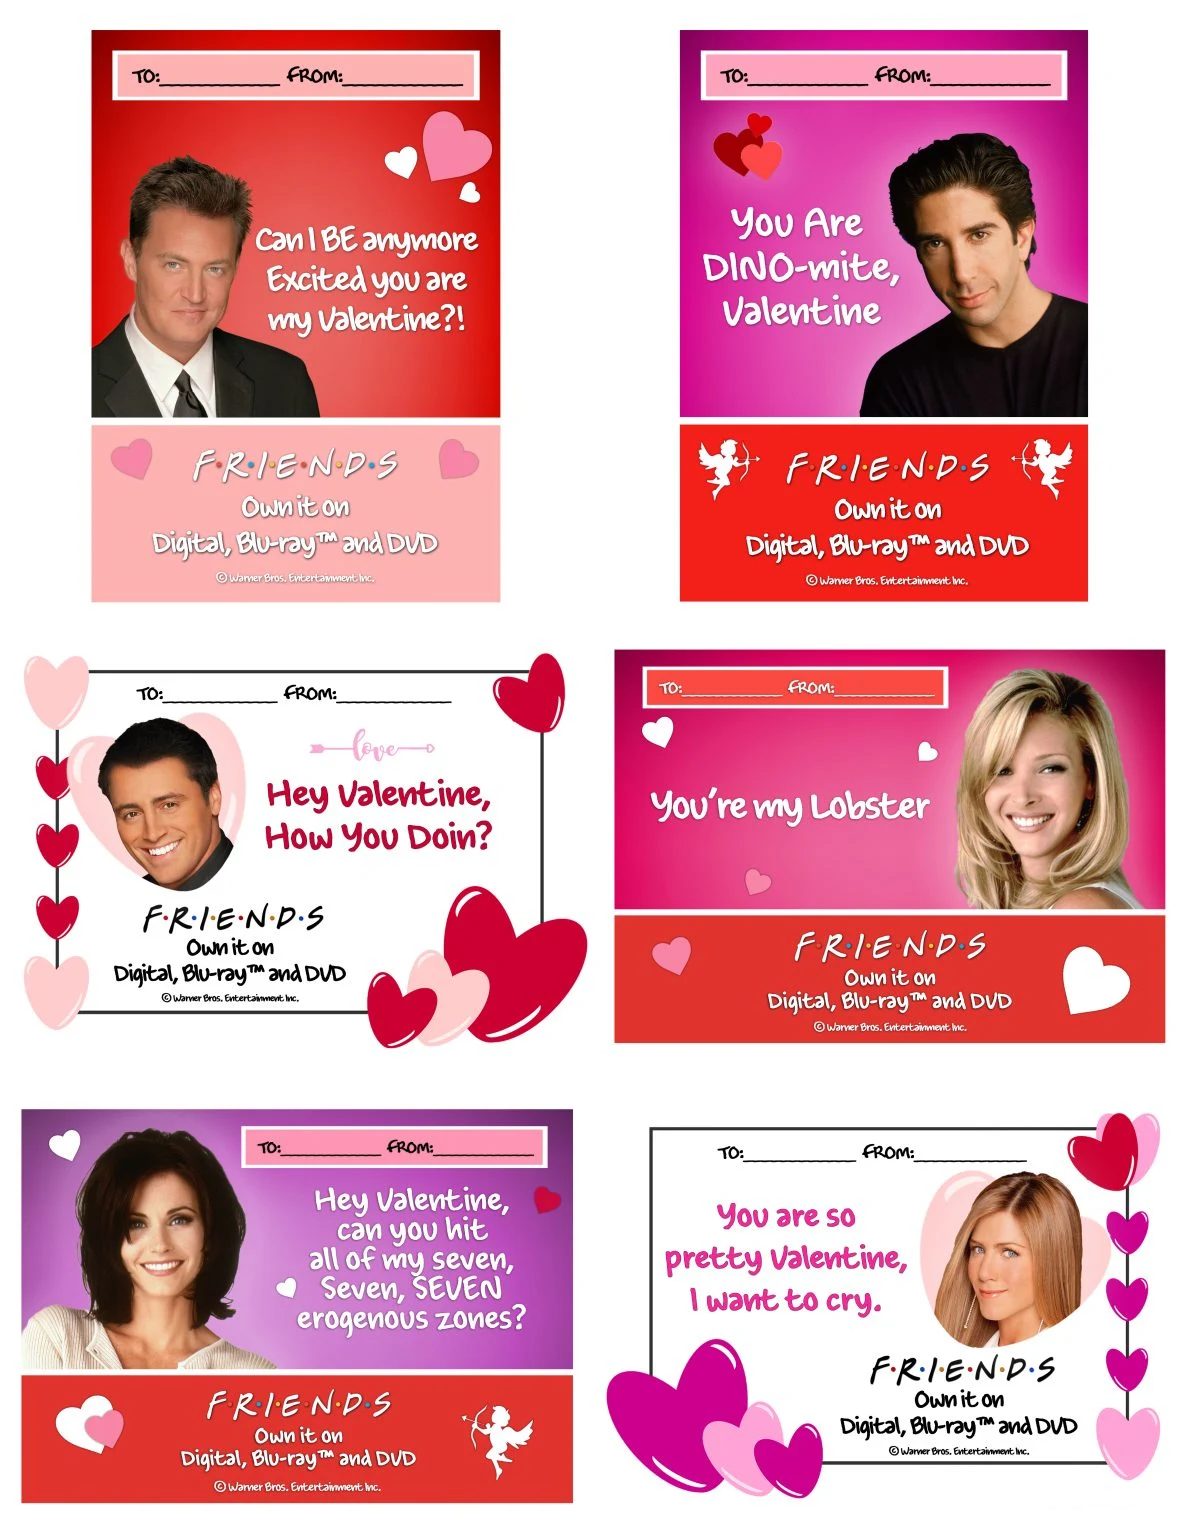 FRIENDS TV SHOW VALENTINES FREE PRINTABLE